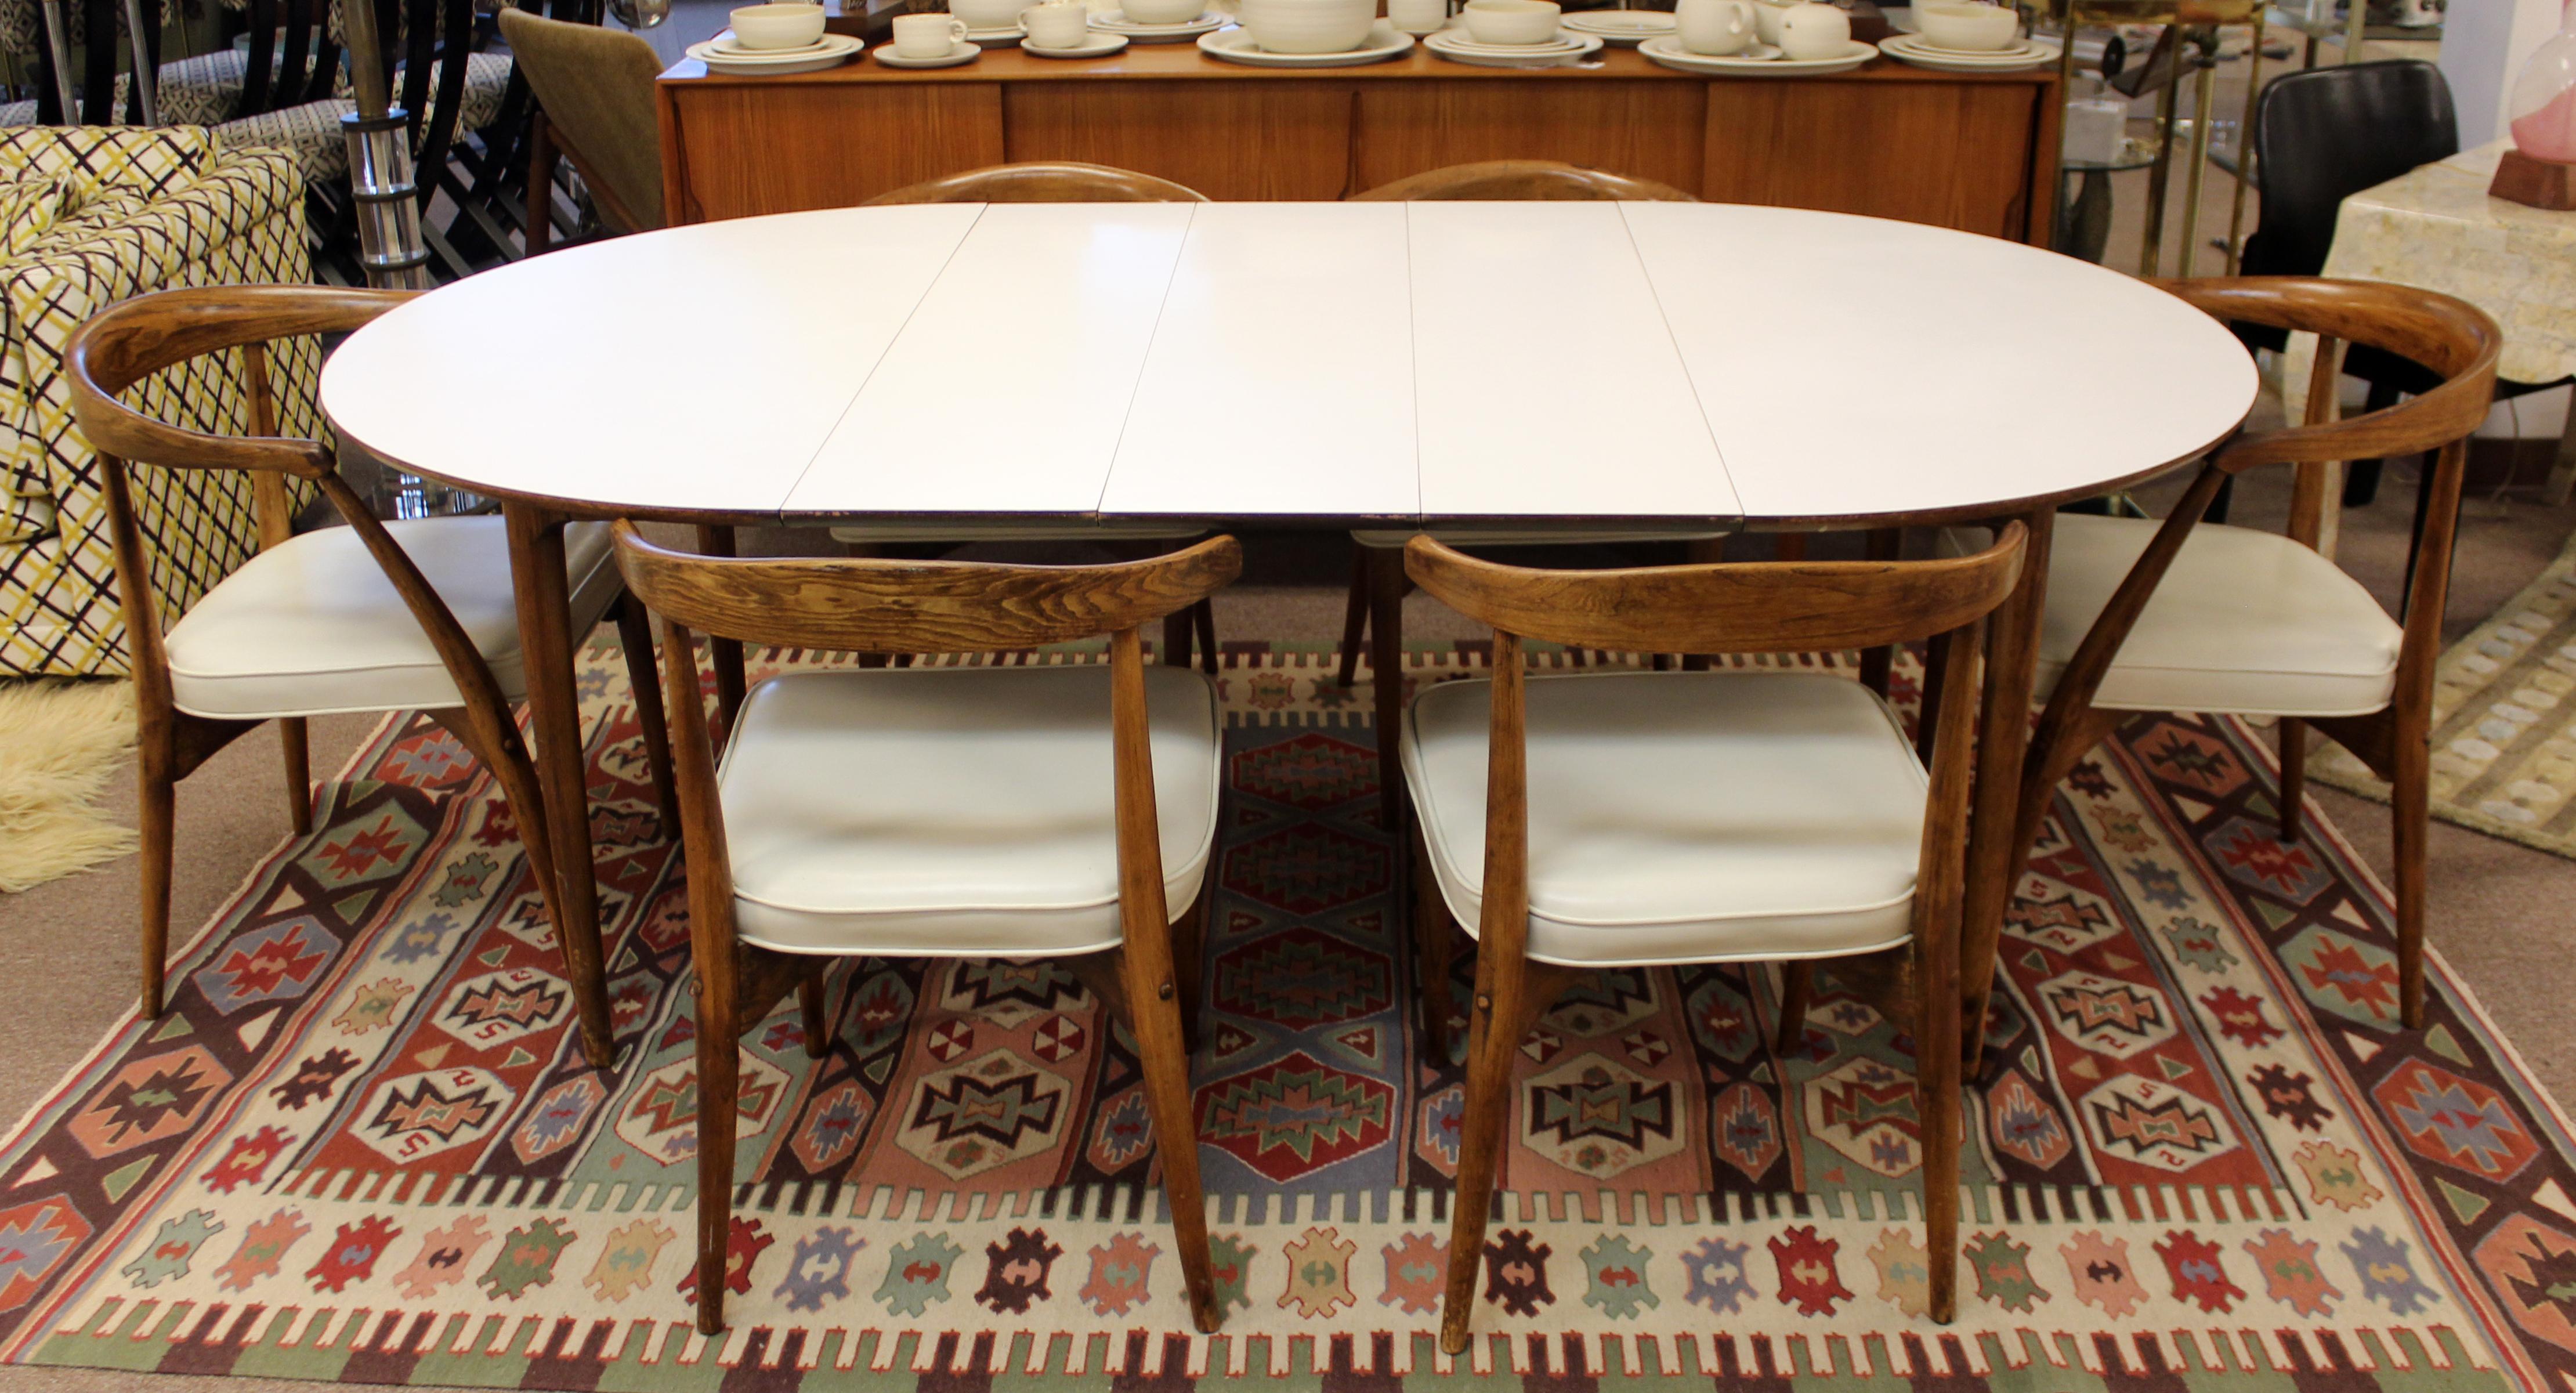 For your consideration is a classically luxe dining set, including table with three leaves and six side chairs, designed by Lawrence Peabody, circa 1950s-1960s. In excellent vintage condition. The dimensions of the table are 47